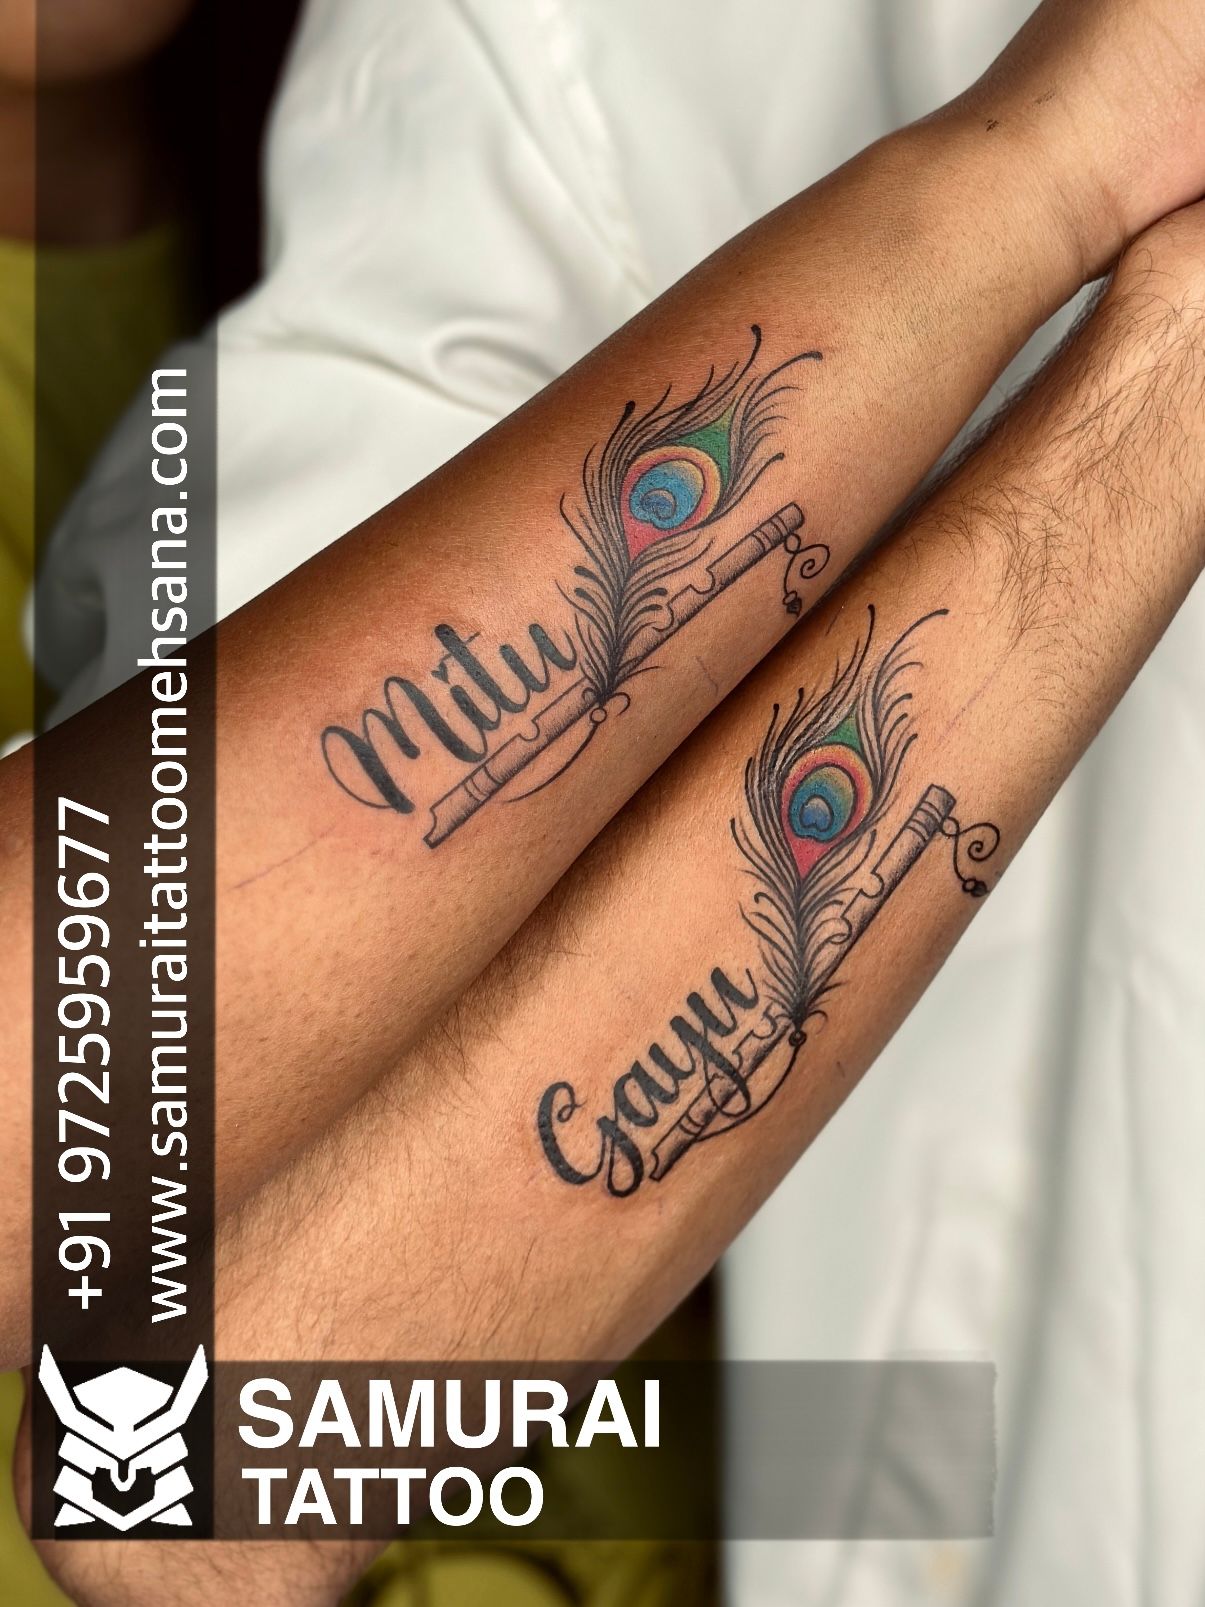 couple tattoos - Netmarkers- Submit Original Articles, Stories